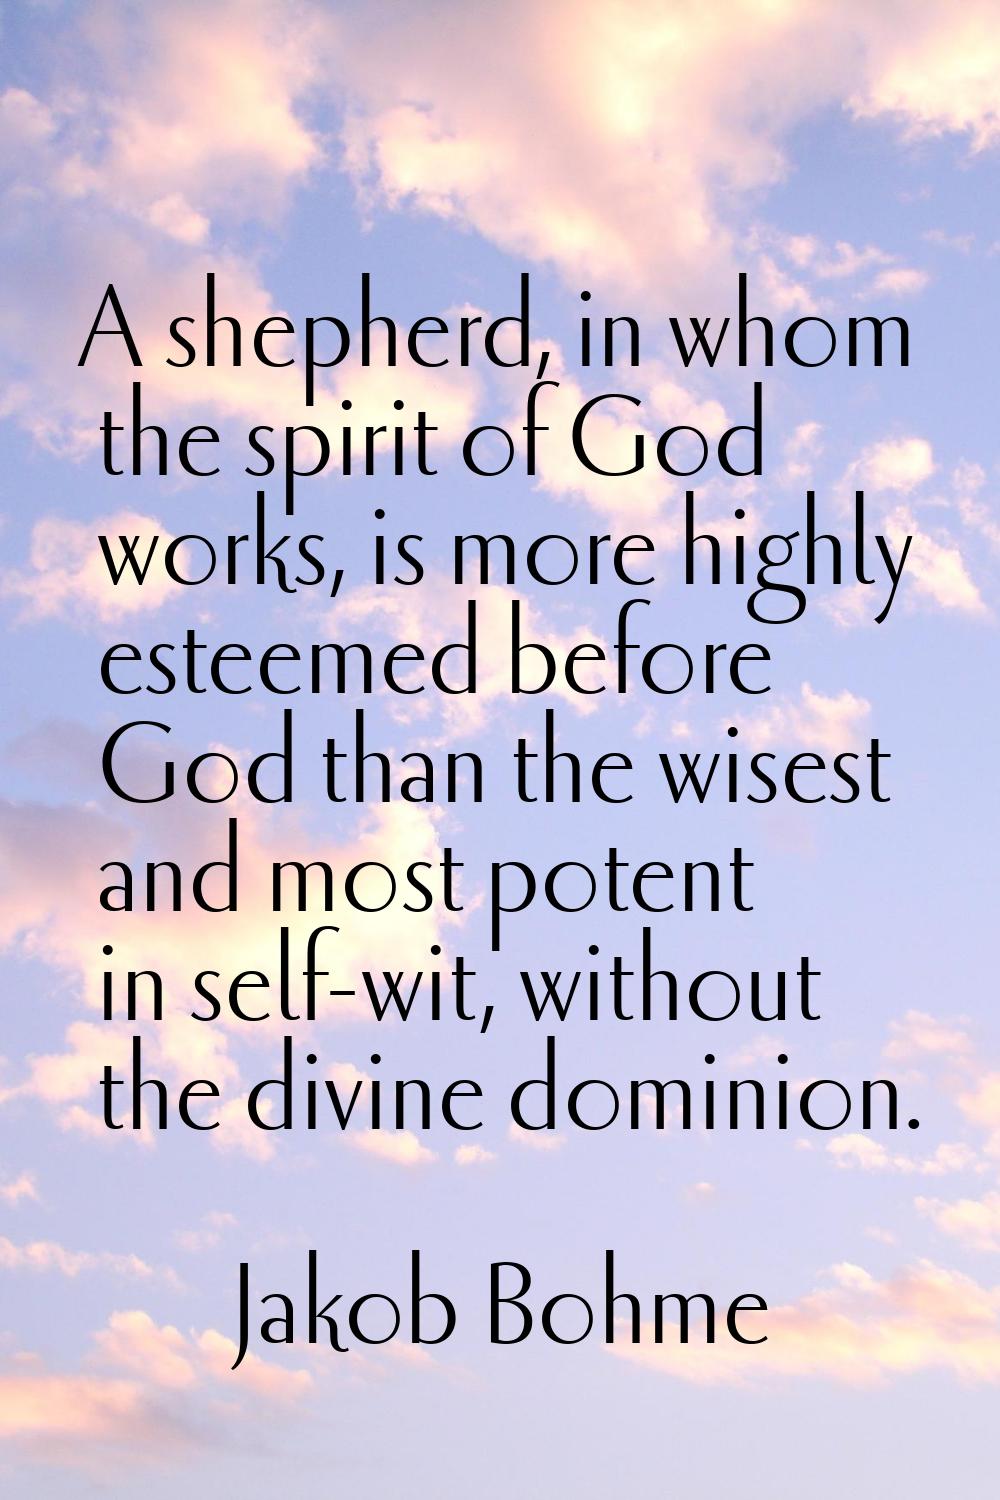 A shepherd, in whom the spirit of God works, is more highly esteemed before God than the wisest and